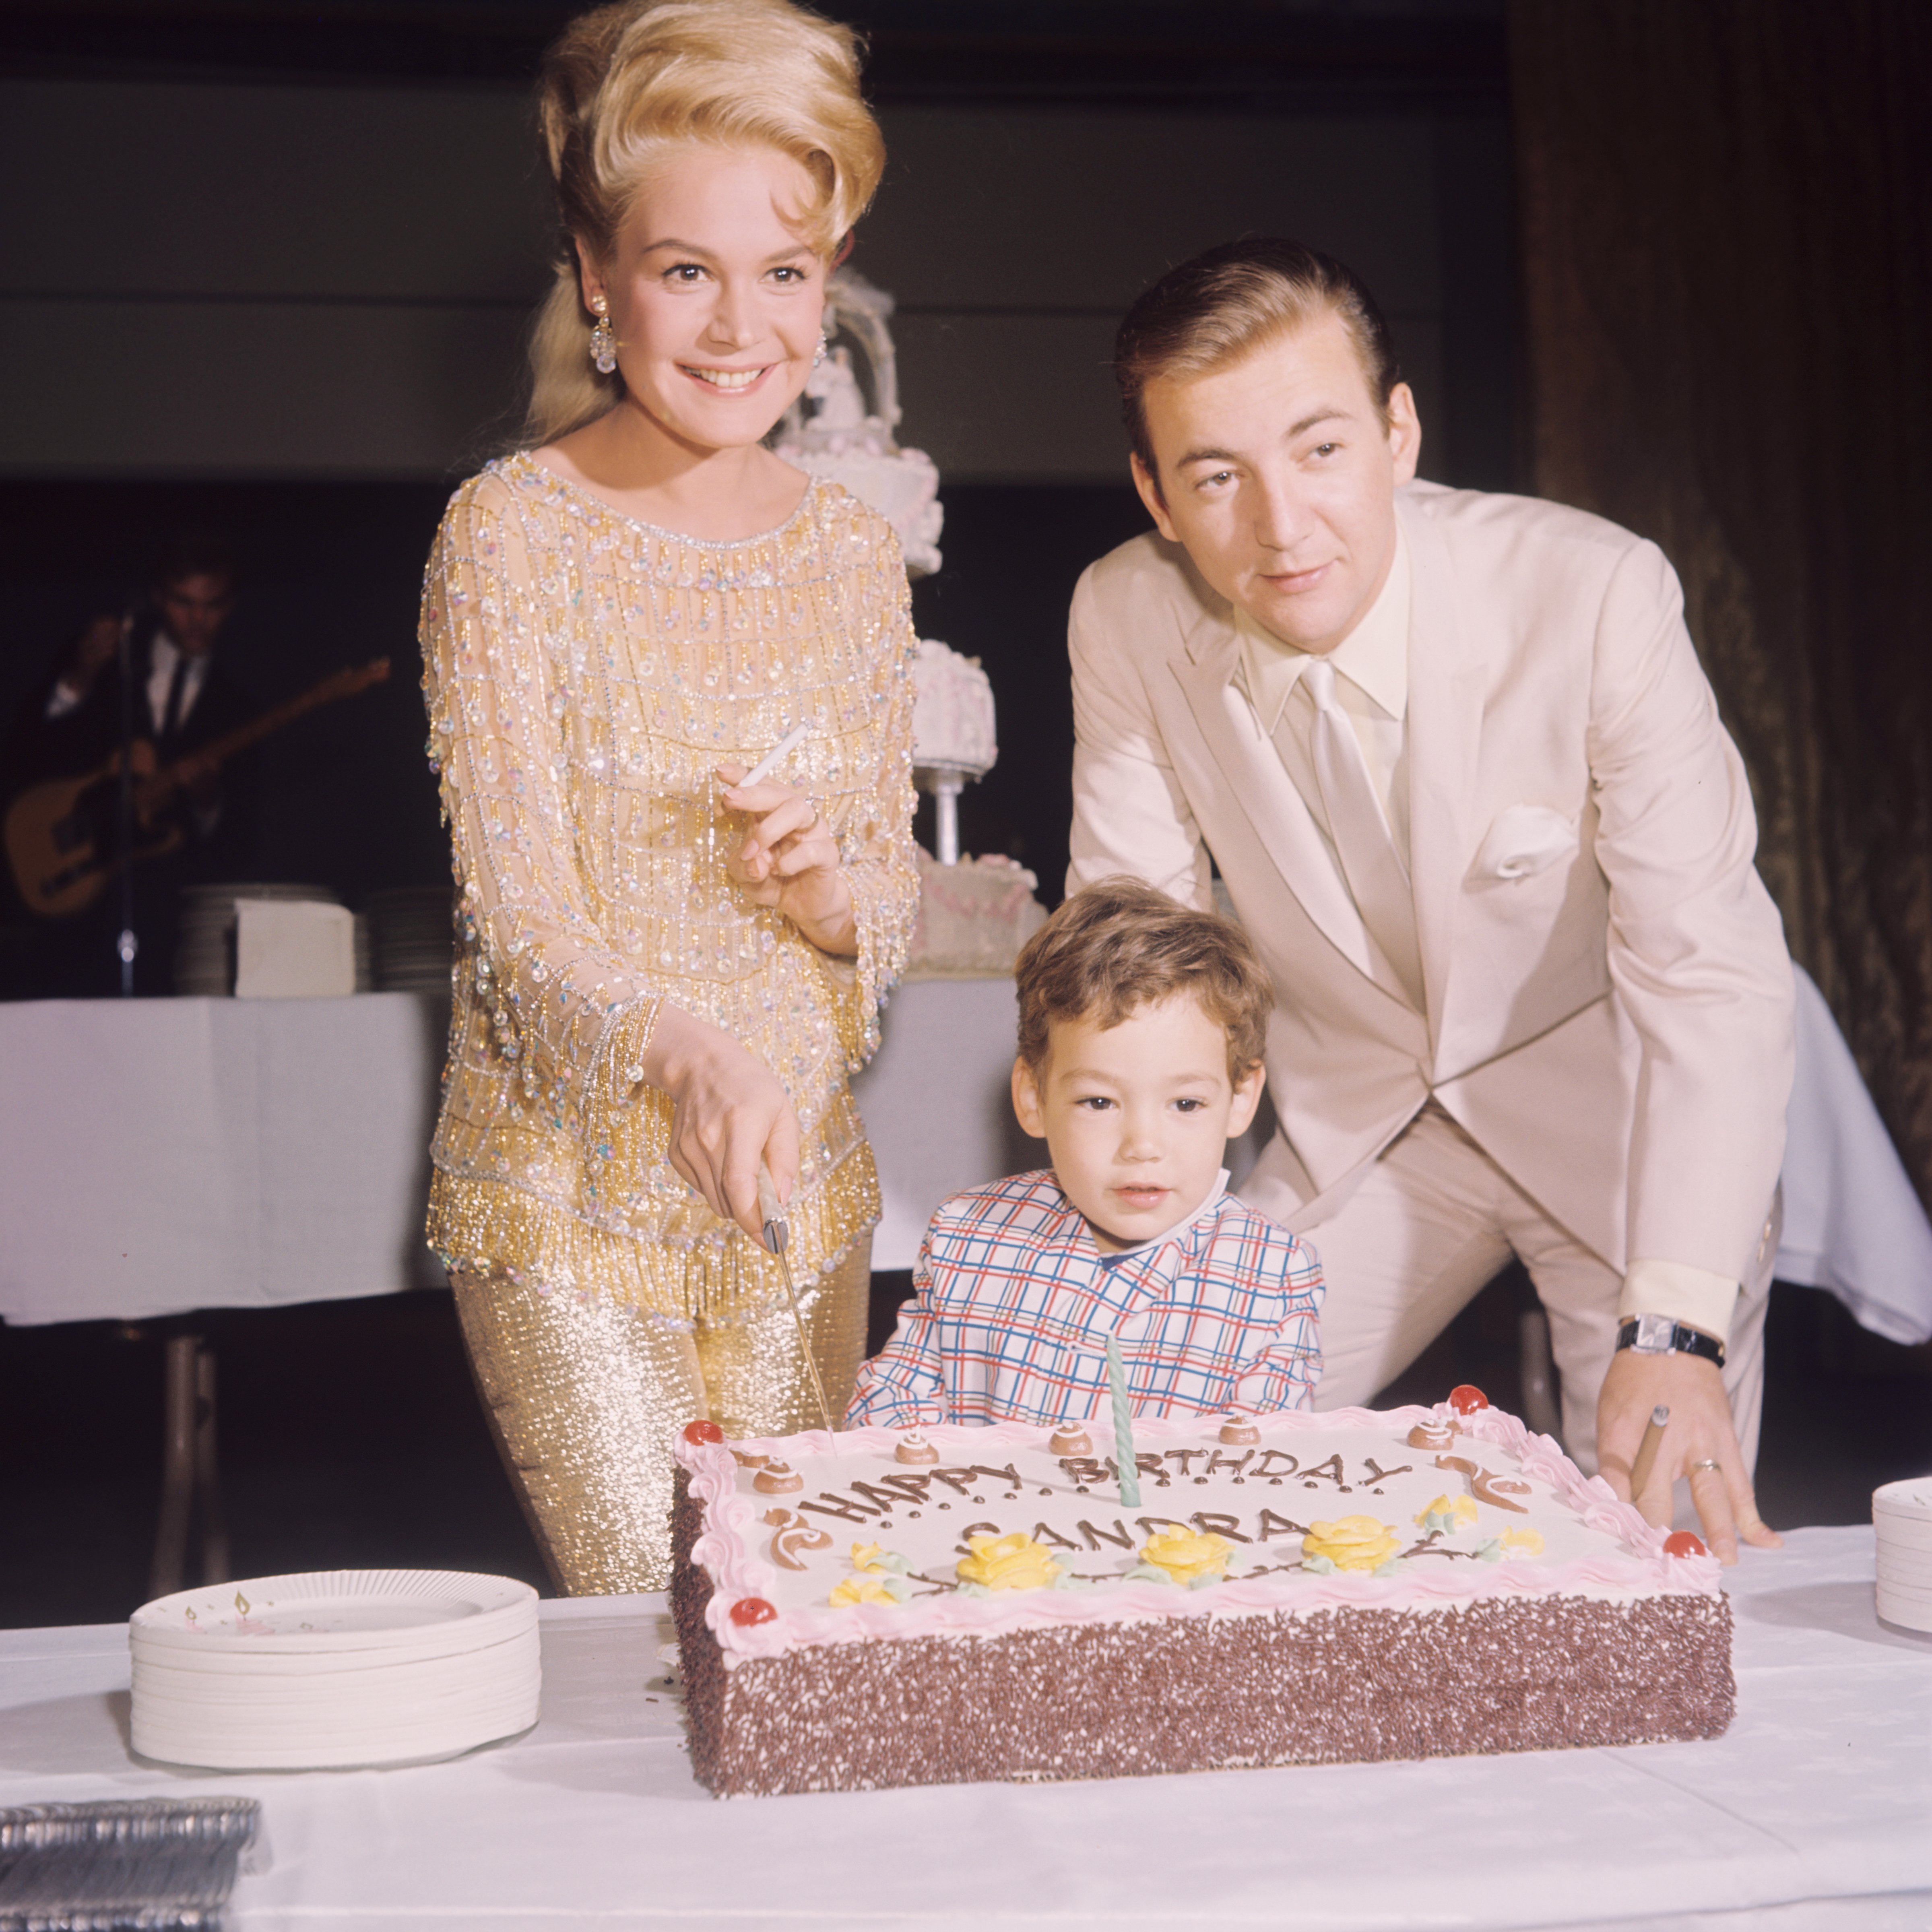 American singer Bobby Darin (1936 - 1973) celebrates the birthday of his wife, actress Sandra Dee (1942 - 2005), with their son Dodd, circa 1966. | Source: Getty Images